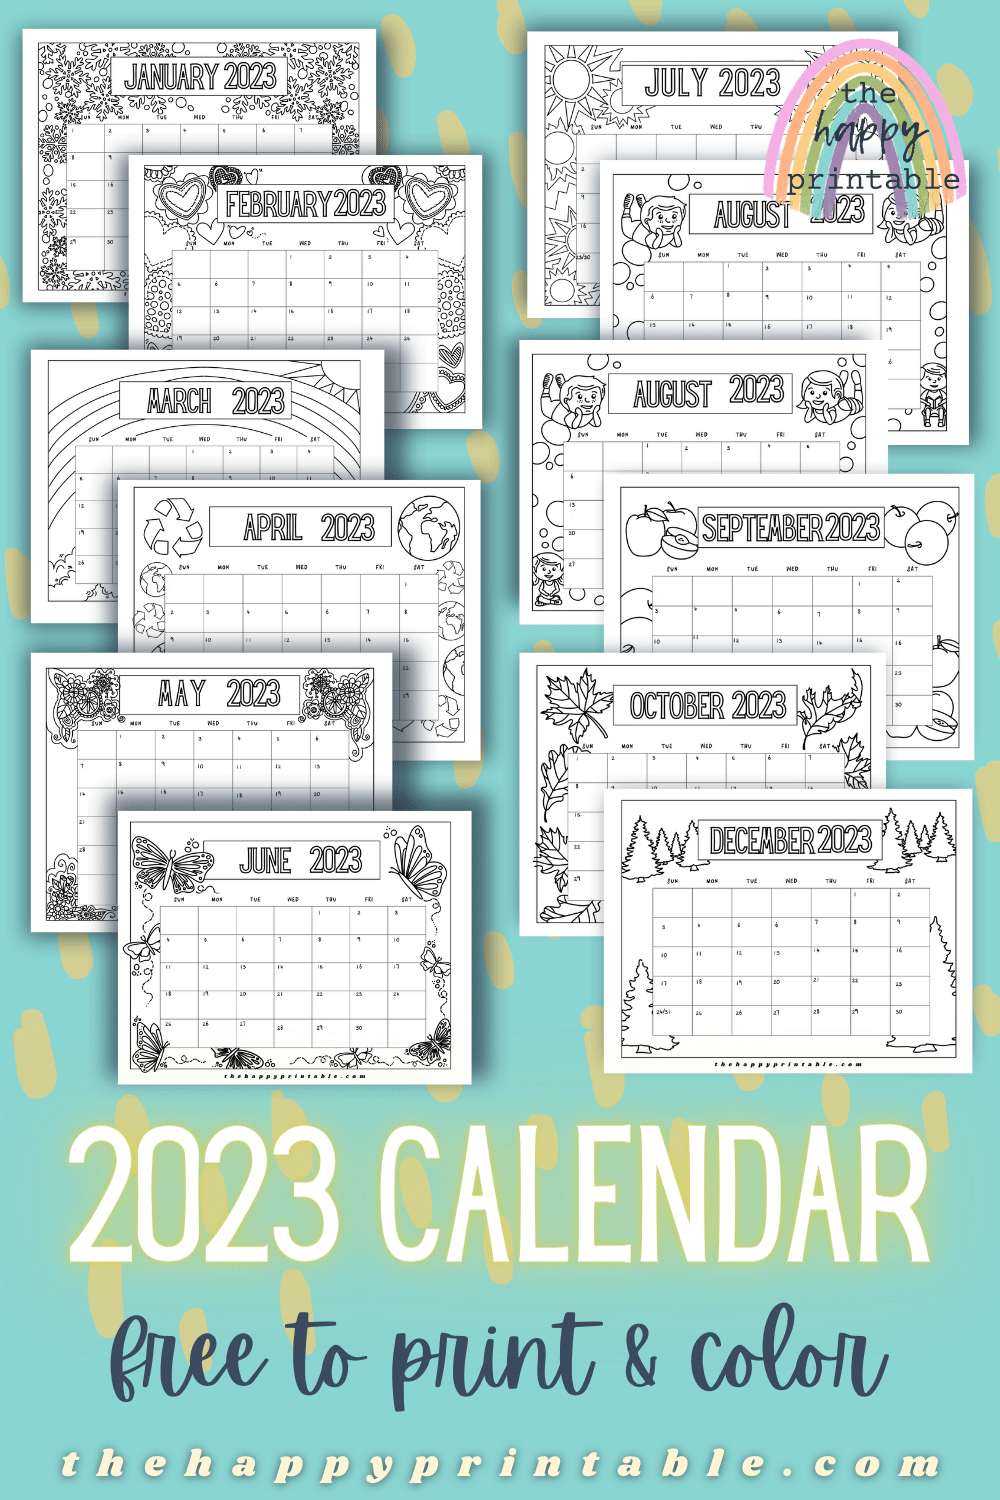 Printable Monthly Calendar to Print & Color | The Happy Printable